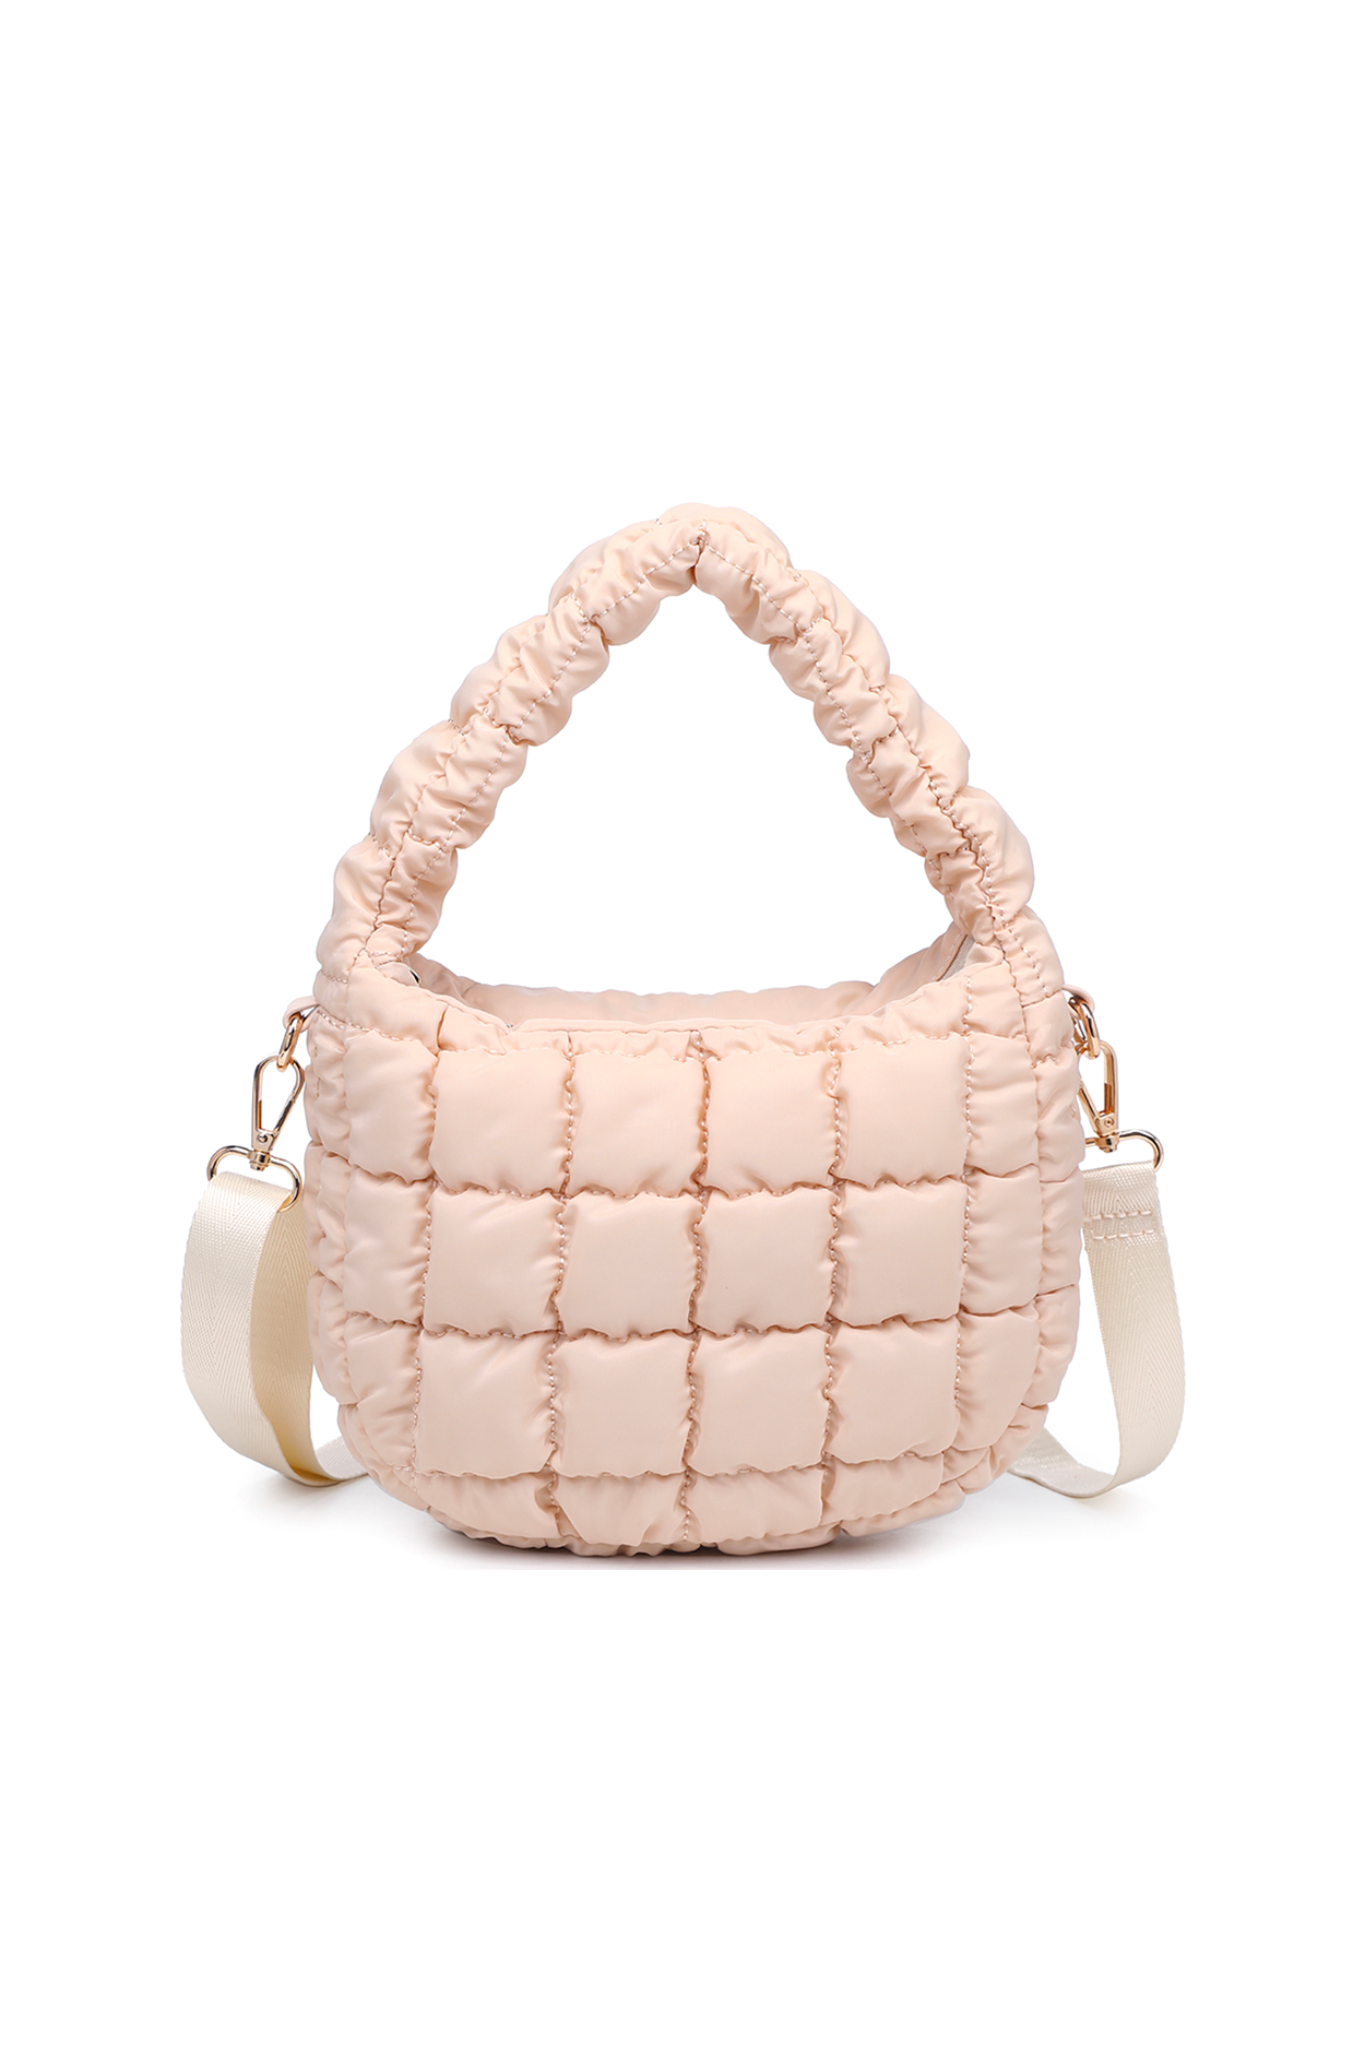 Moiu Mini Quilted Bag in Ivory